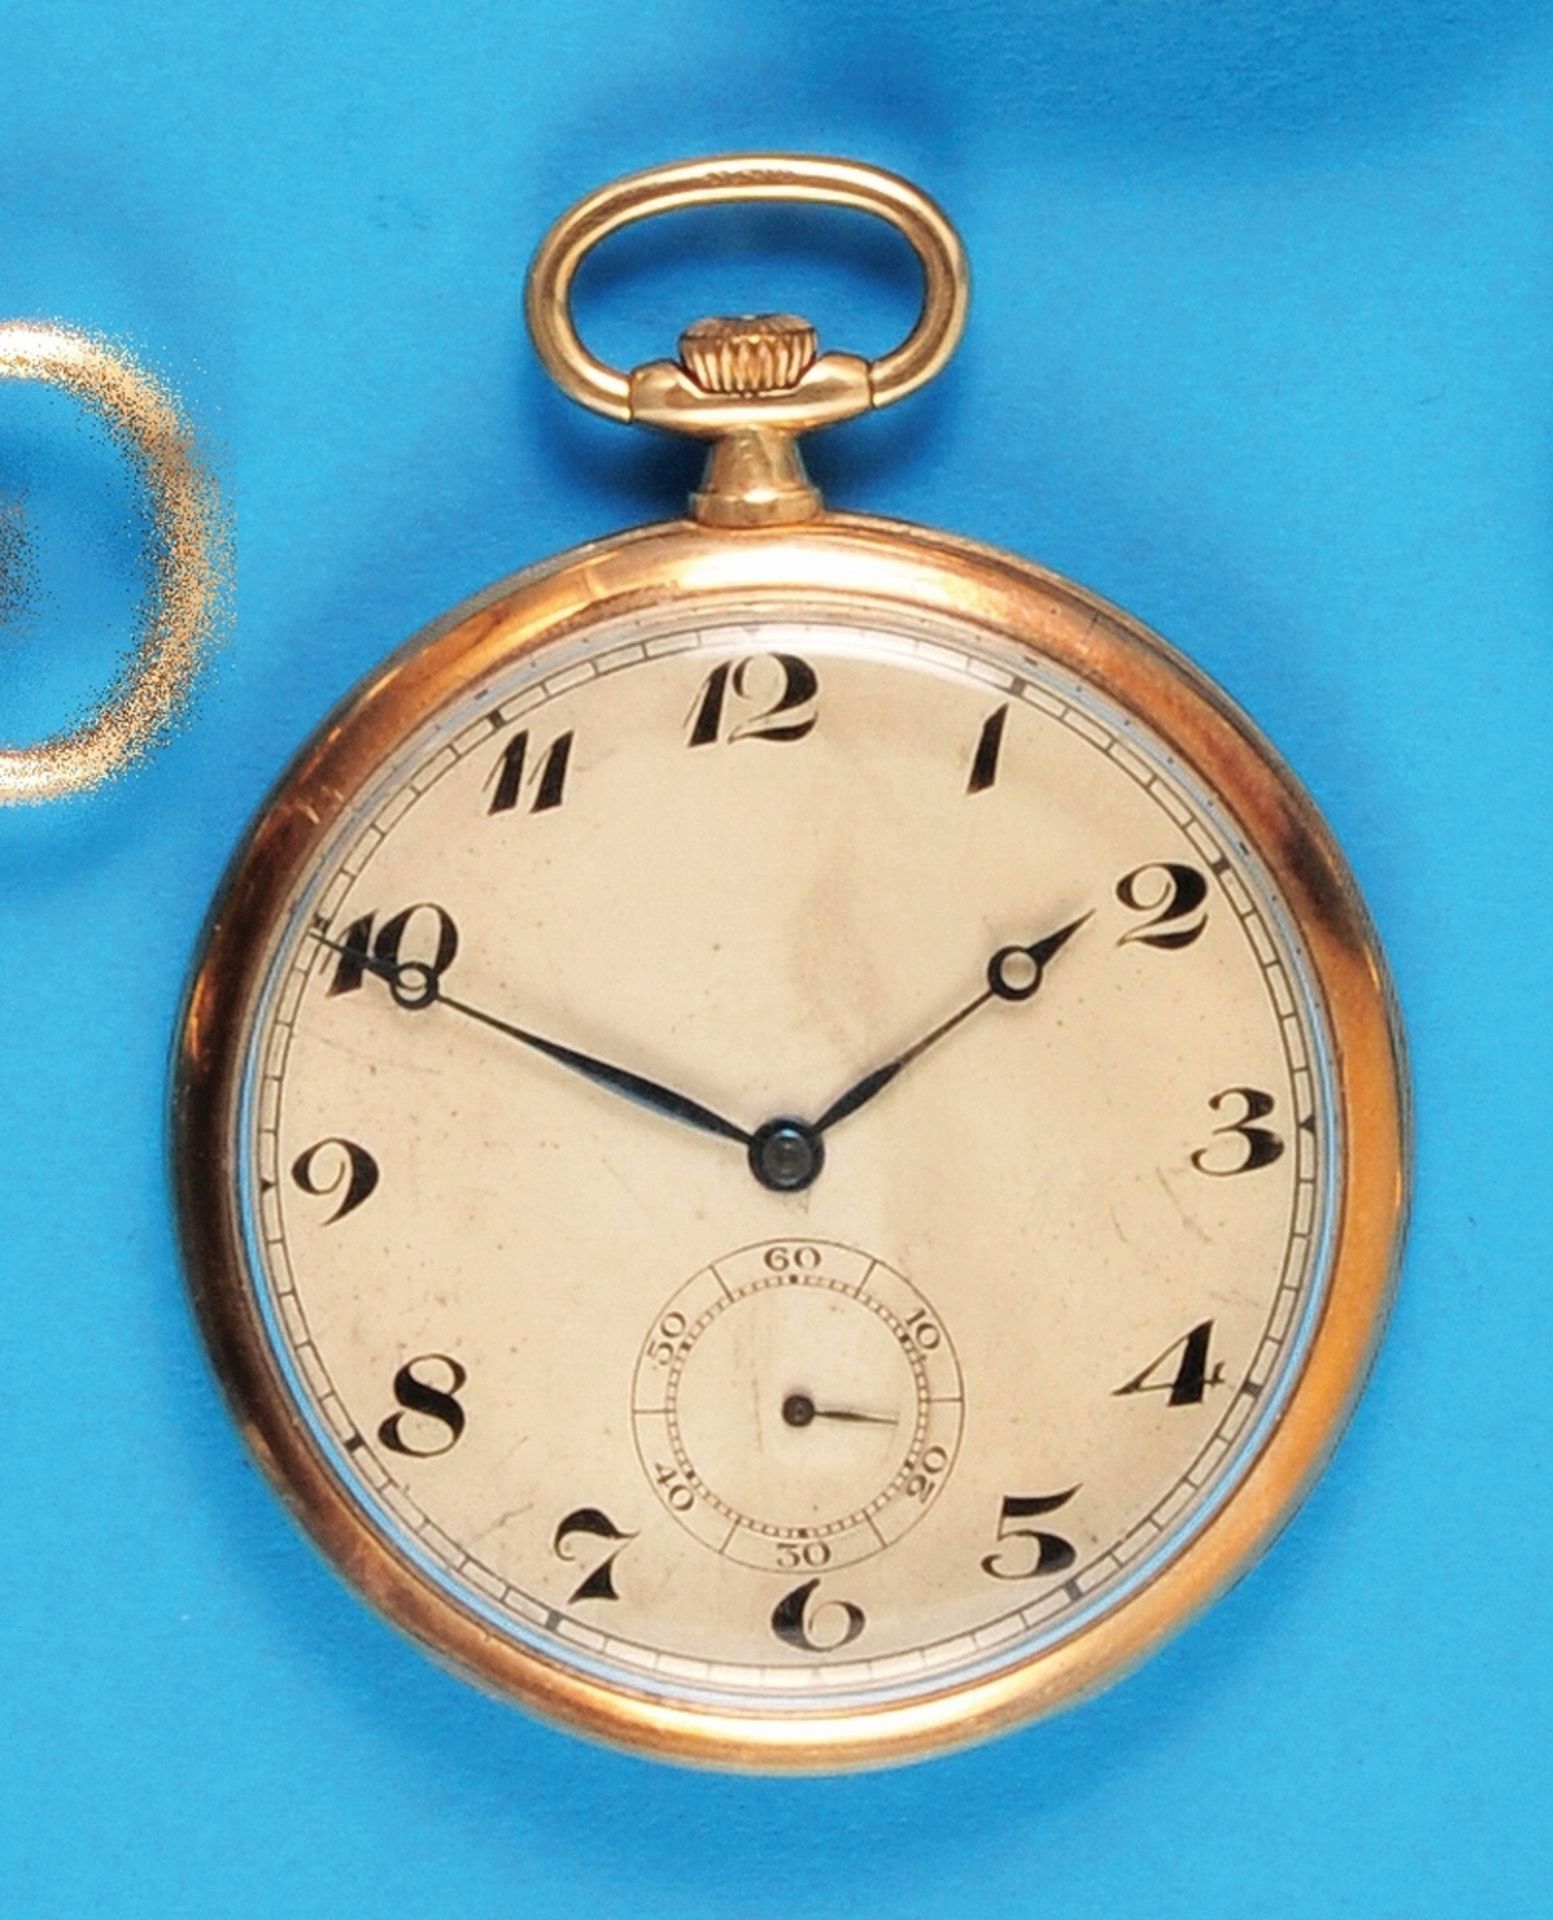 Flat gold pocket watch, signed on the movement. Paul Ditisheim Solvil